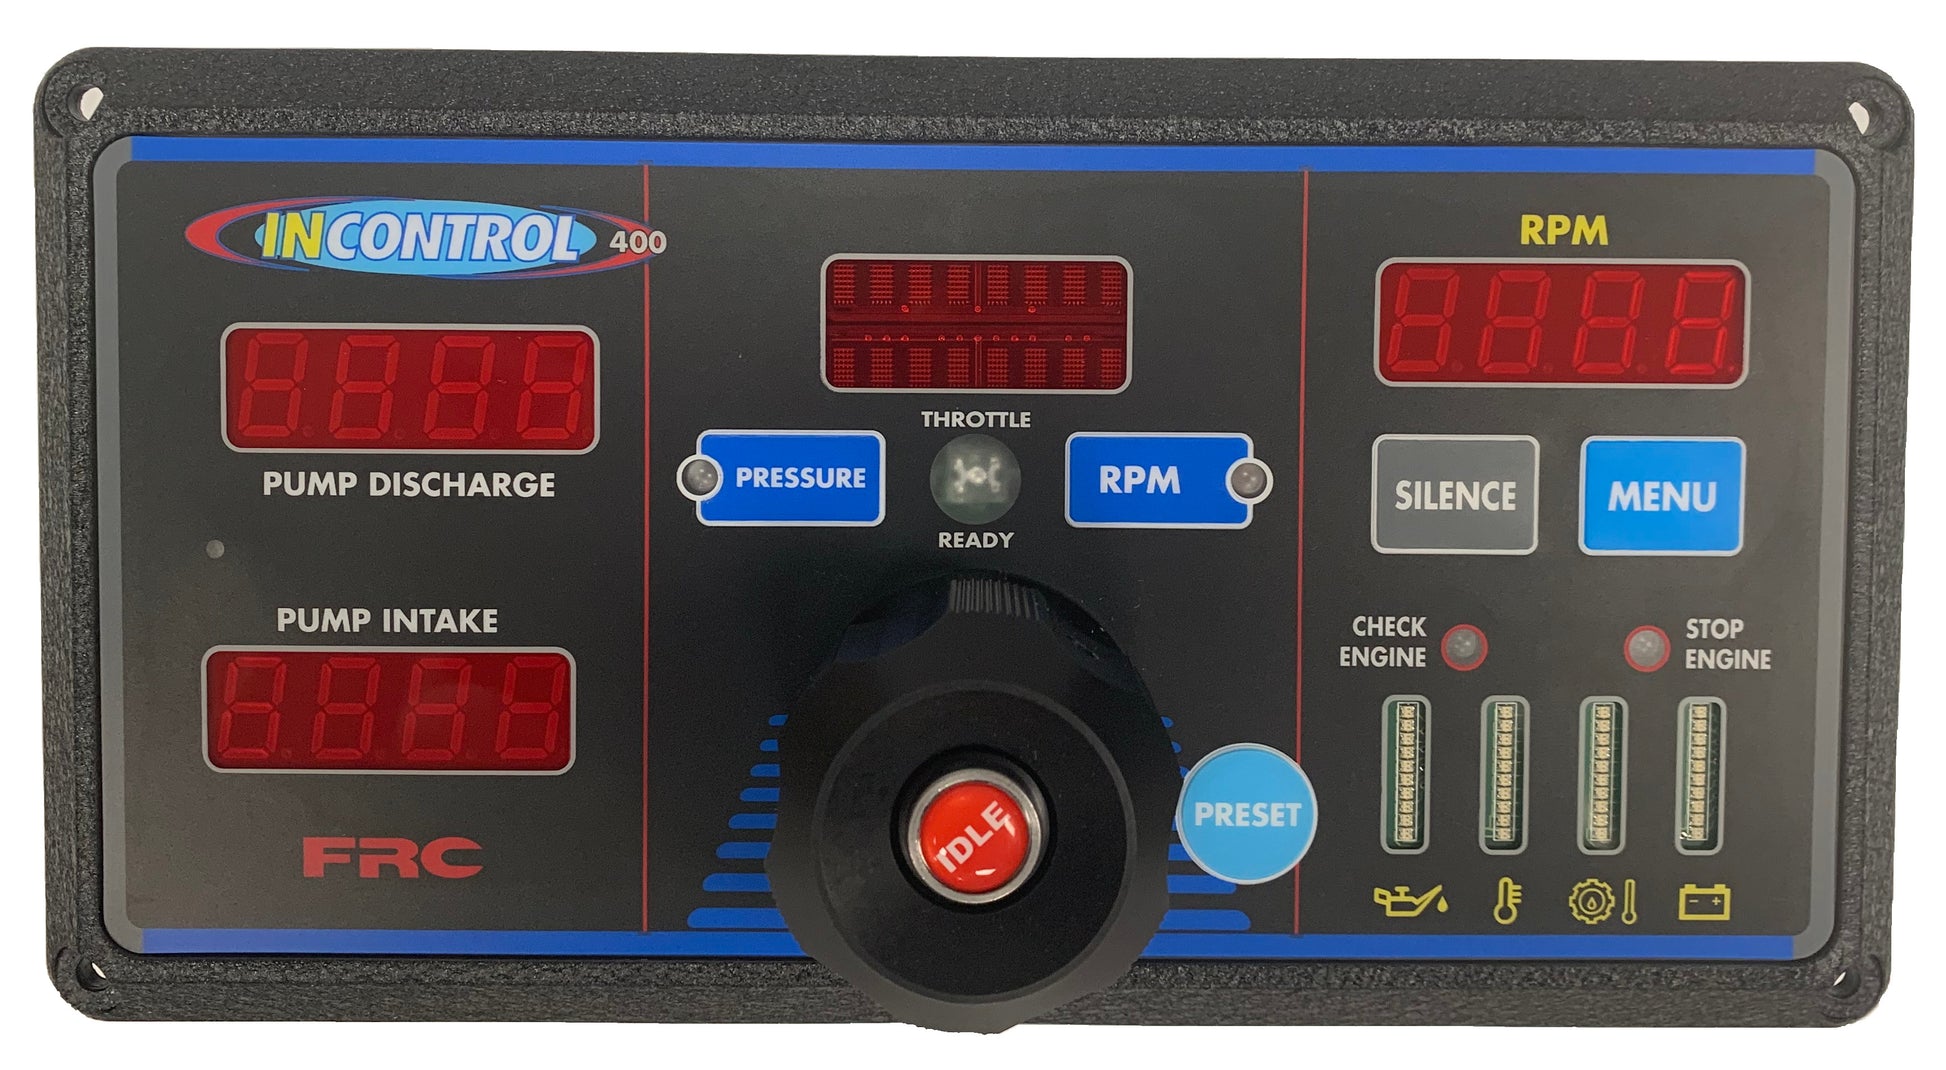 INControl TGA400 All-In-One Pressure Governor & Instrument Panel